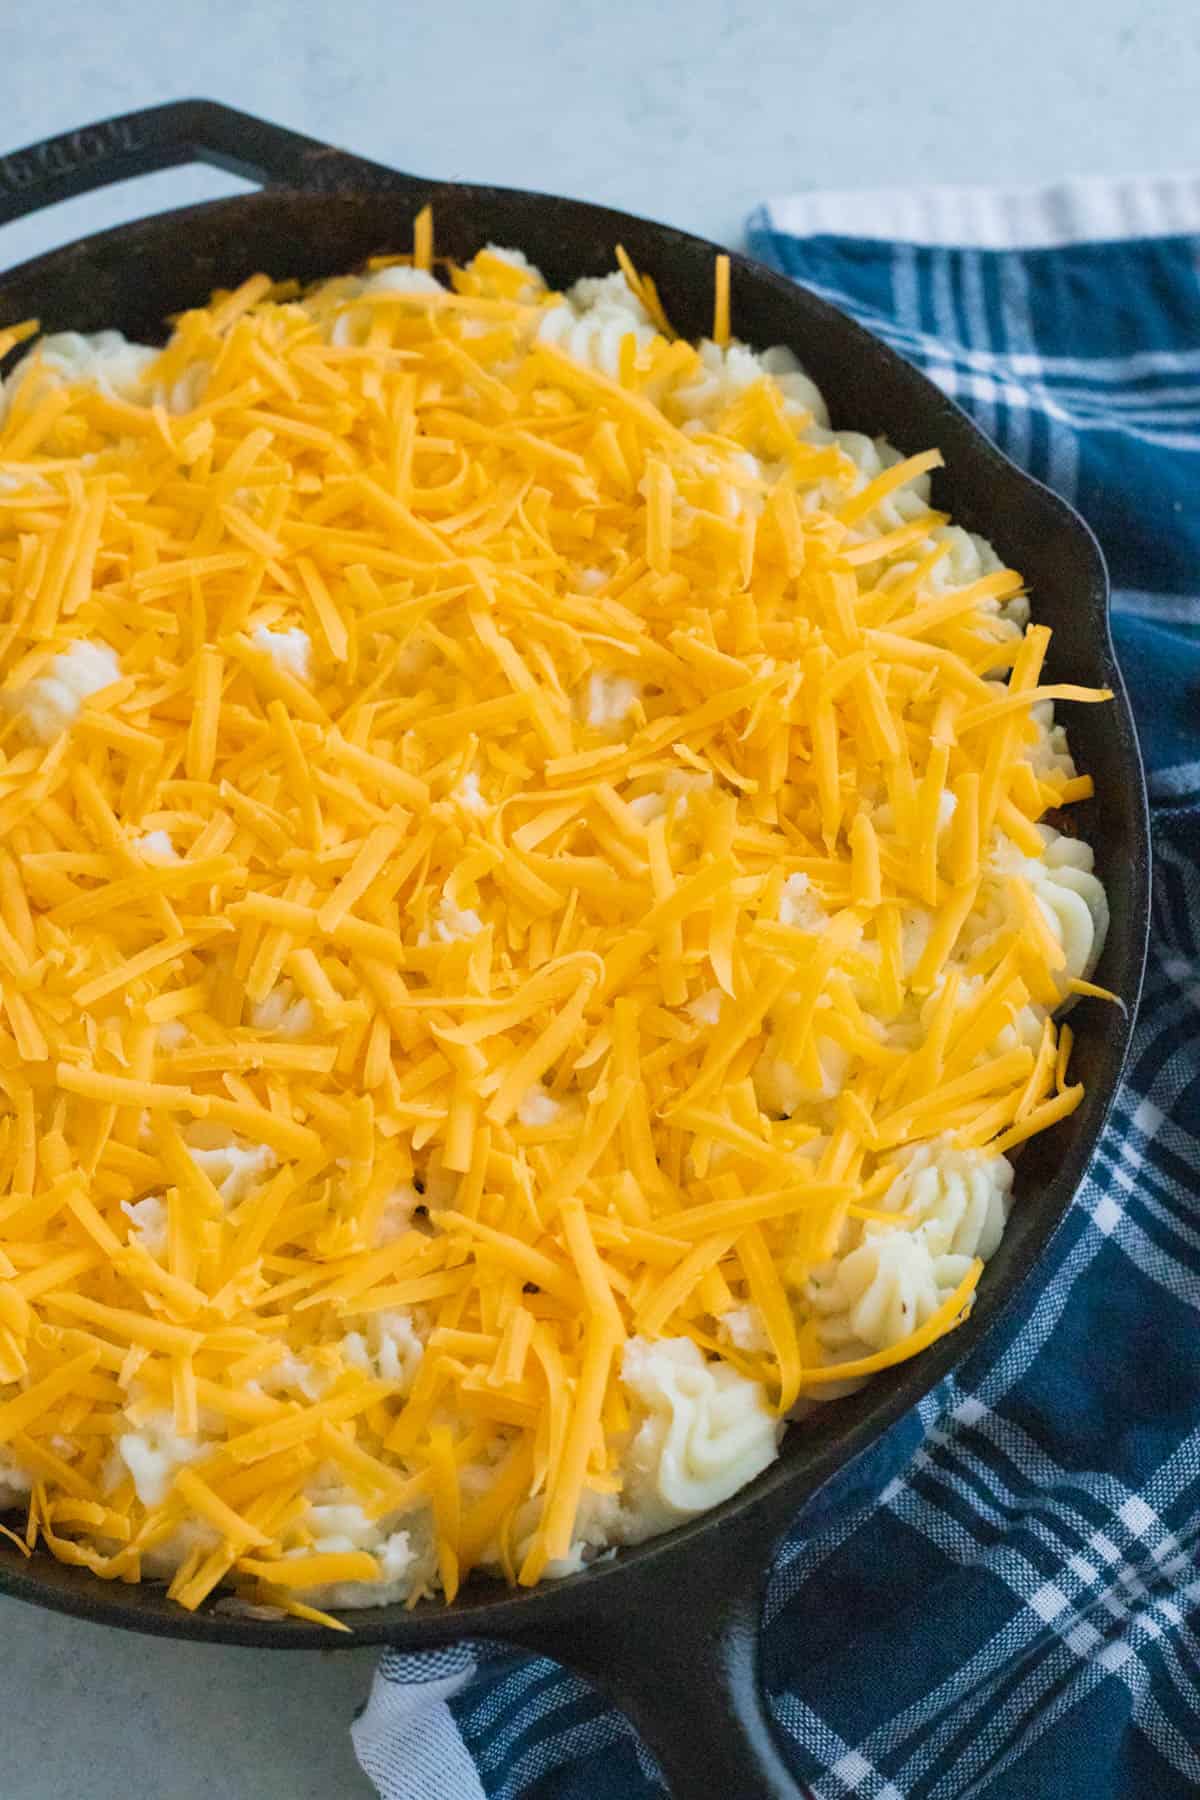 Shepherds Pie with cheese on top ready to bake.